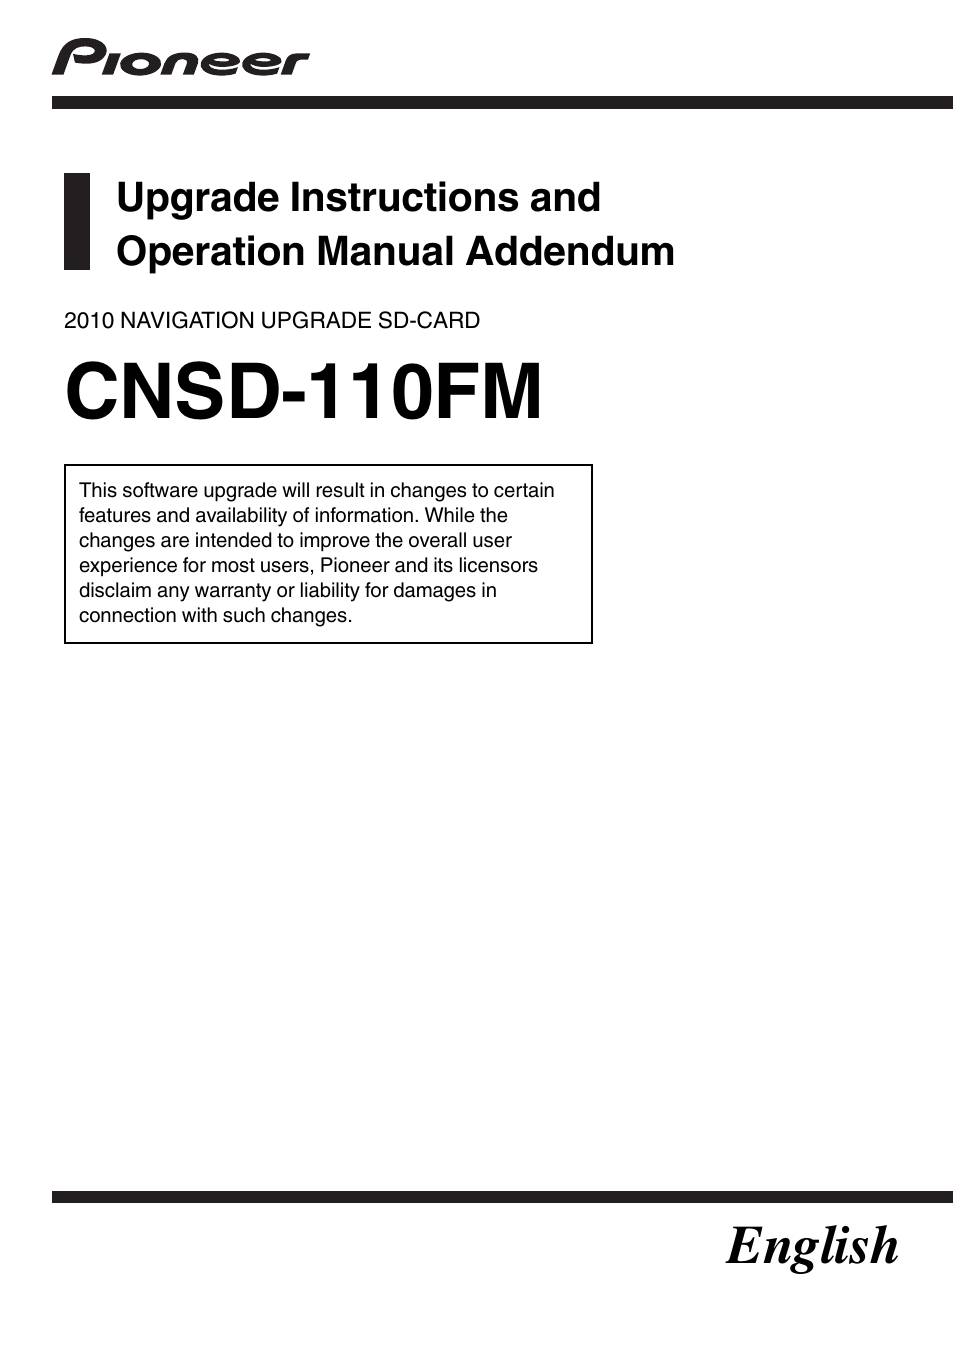 Pioneer CNSD-110FM User Manual | 32 pages